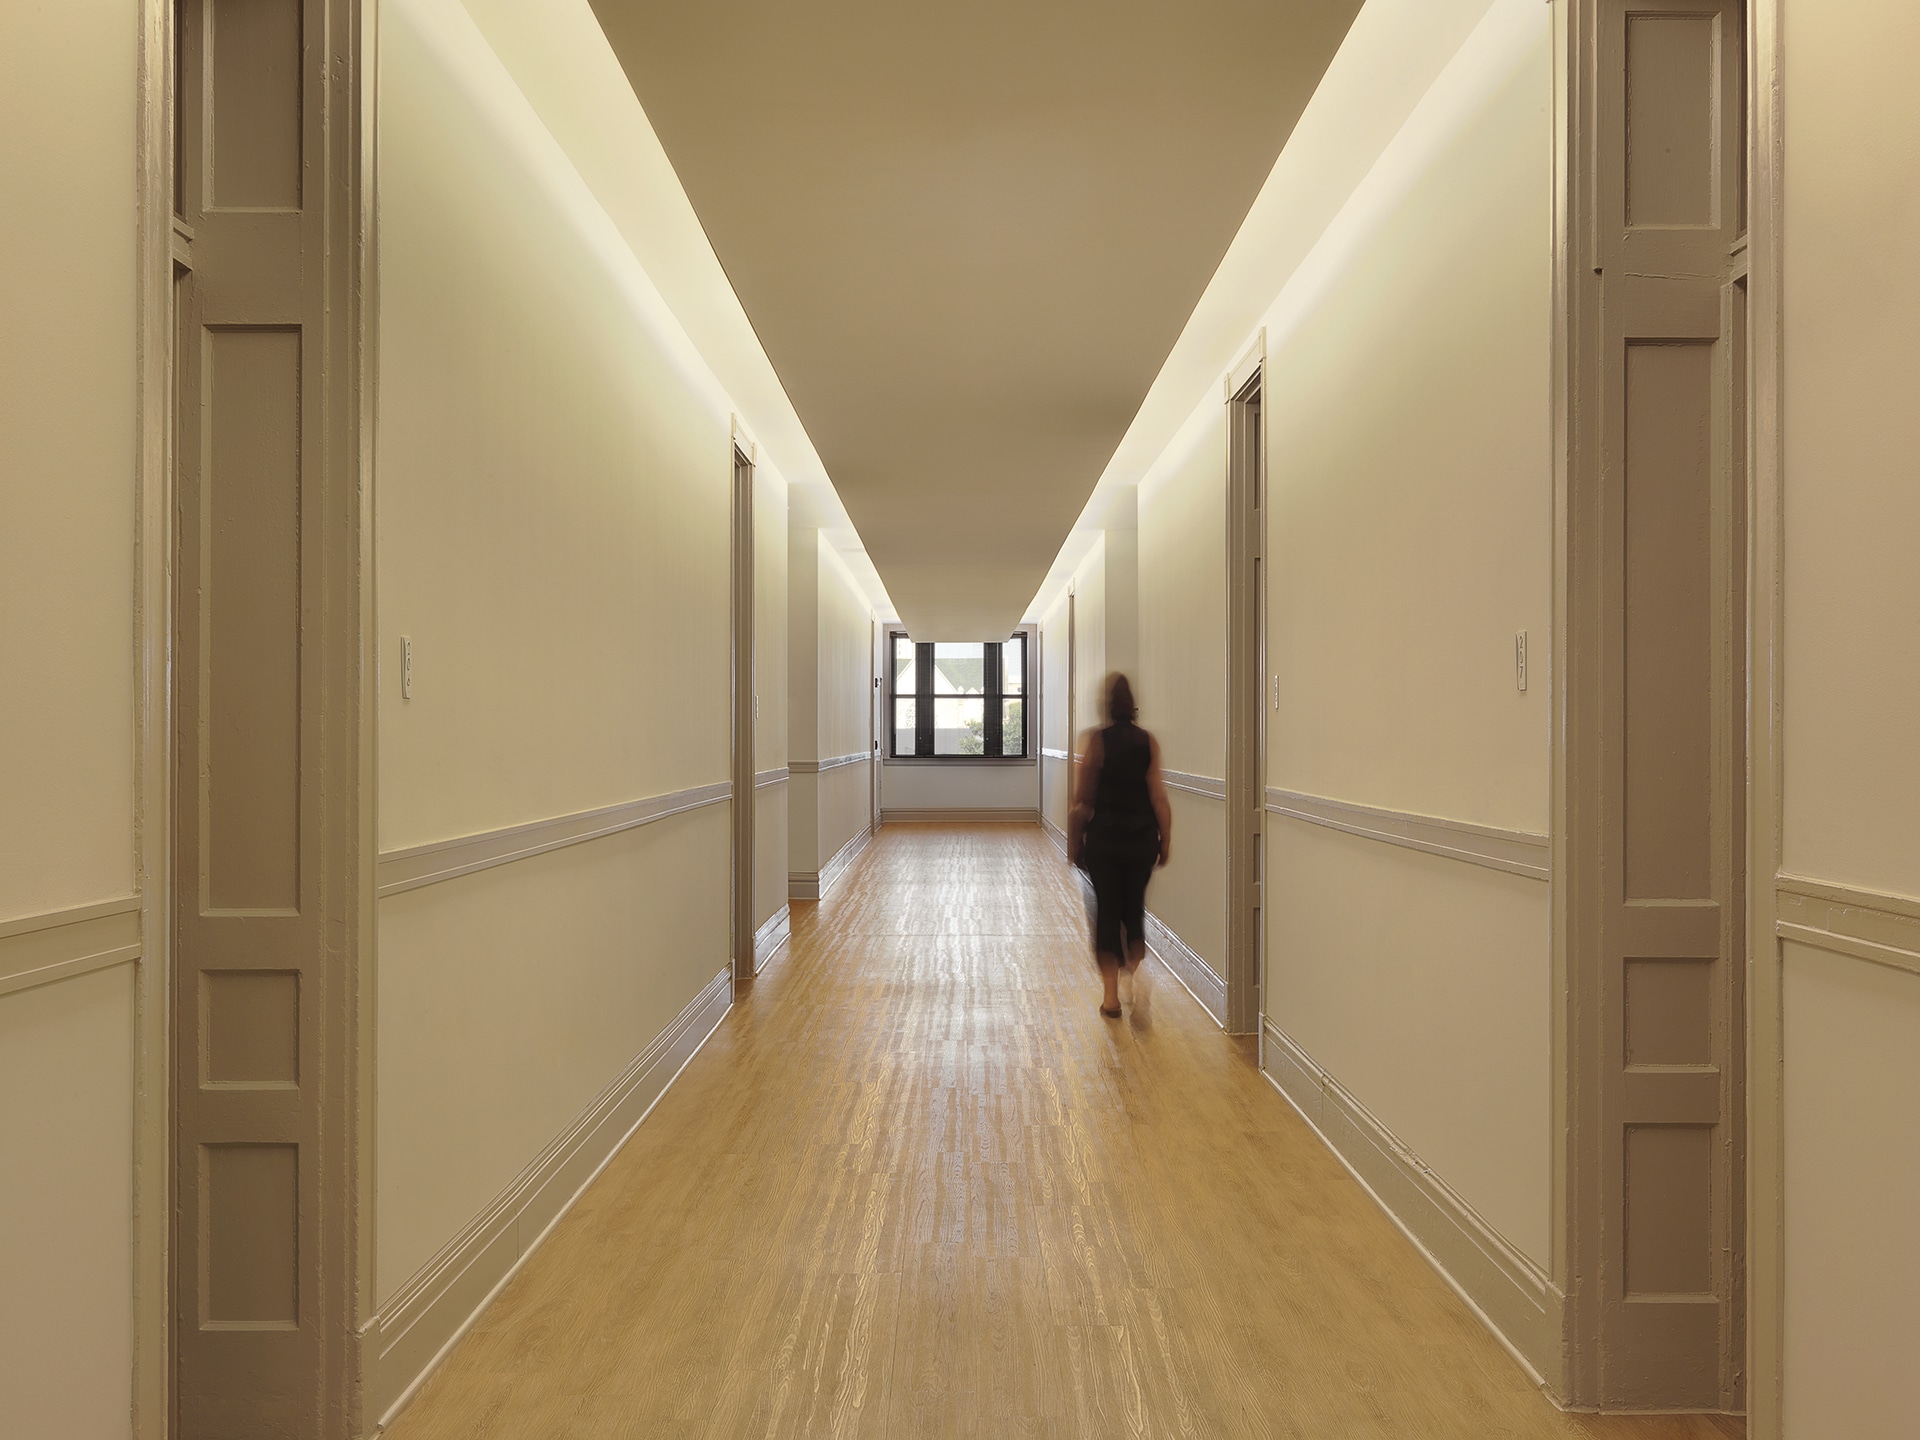 corridor of 3010 apartments designed by trivers architectural firm in st. louis